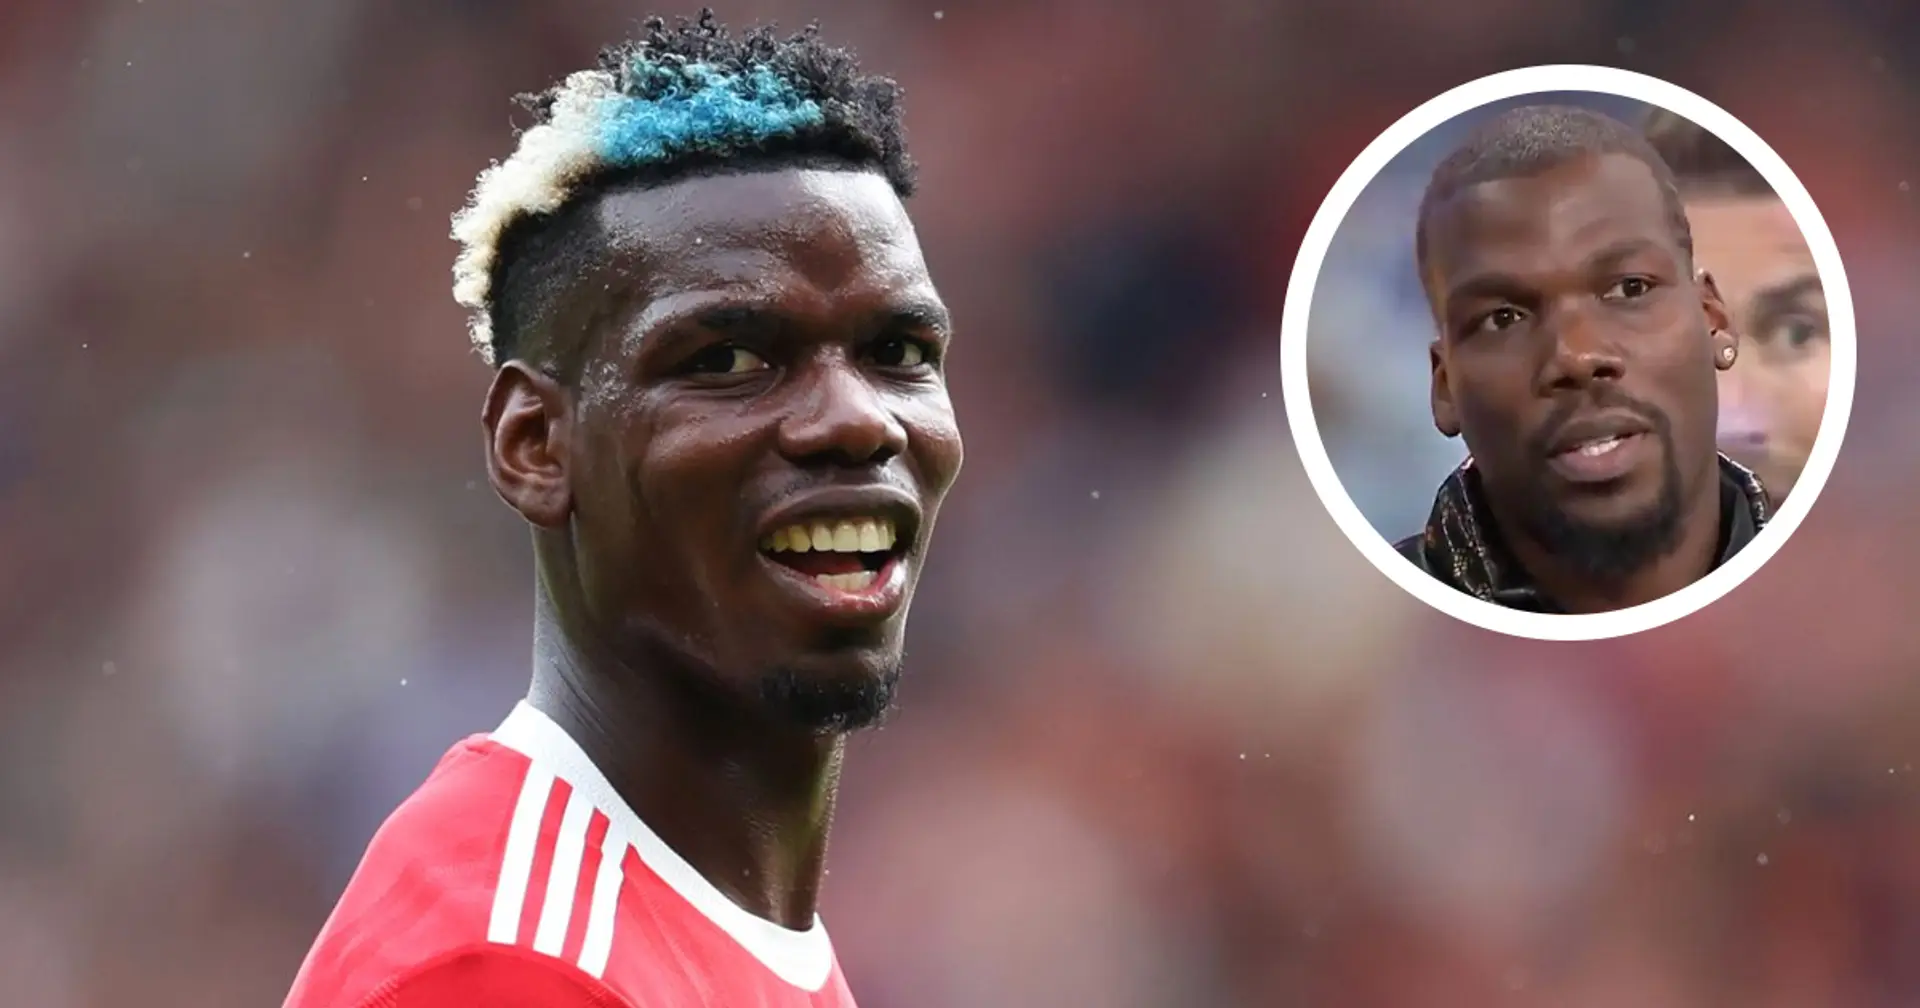 'He’s feeling very good at United now': Paul Pogba's brother offers update on future amid contract rumours